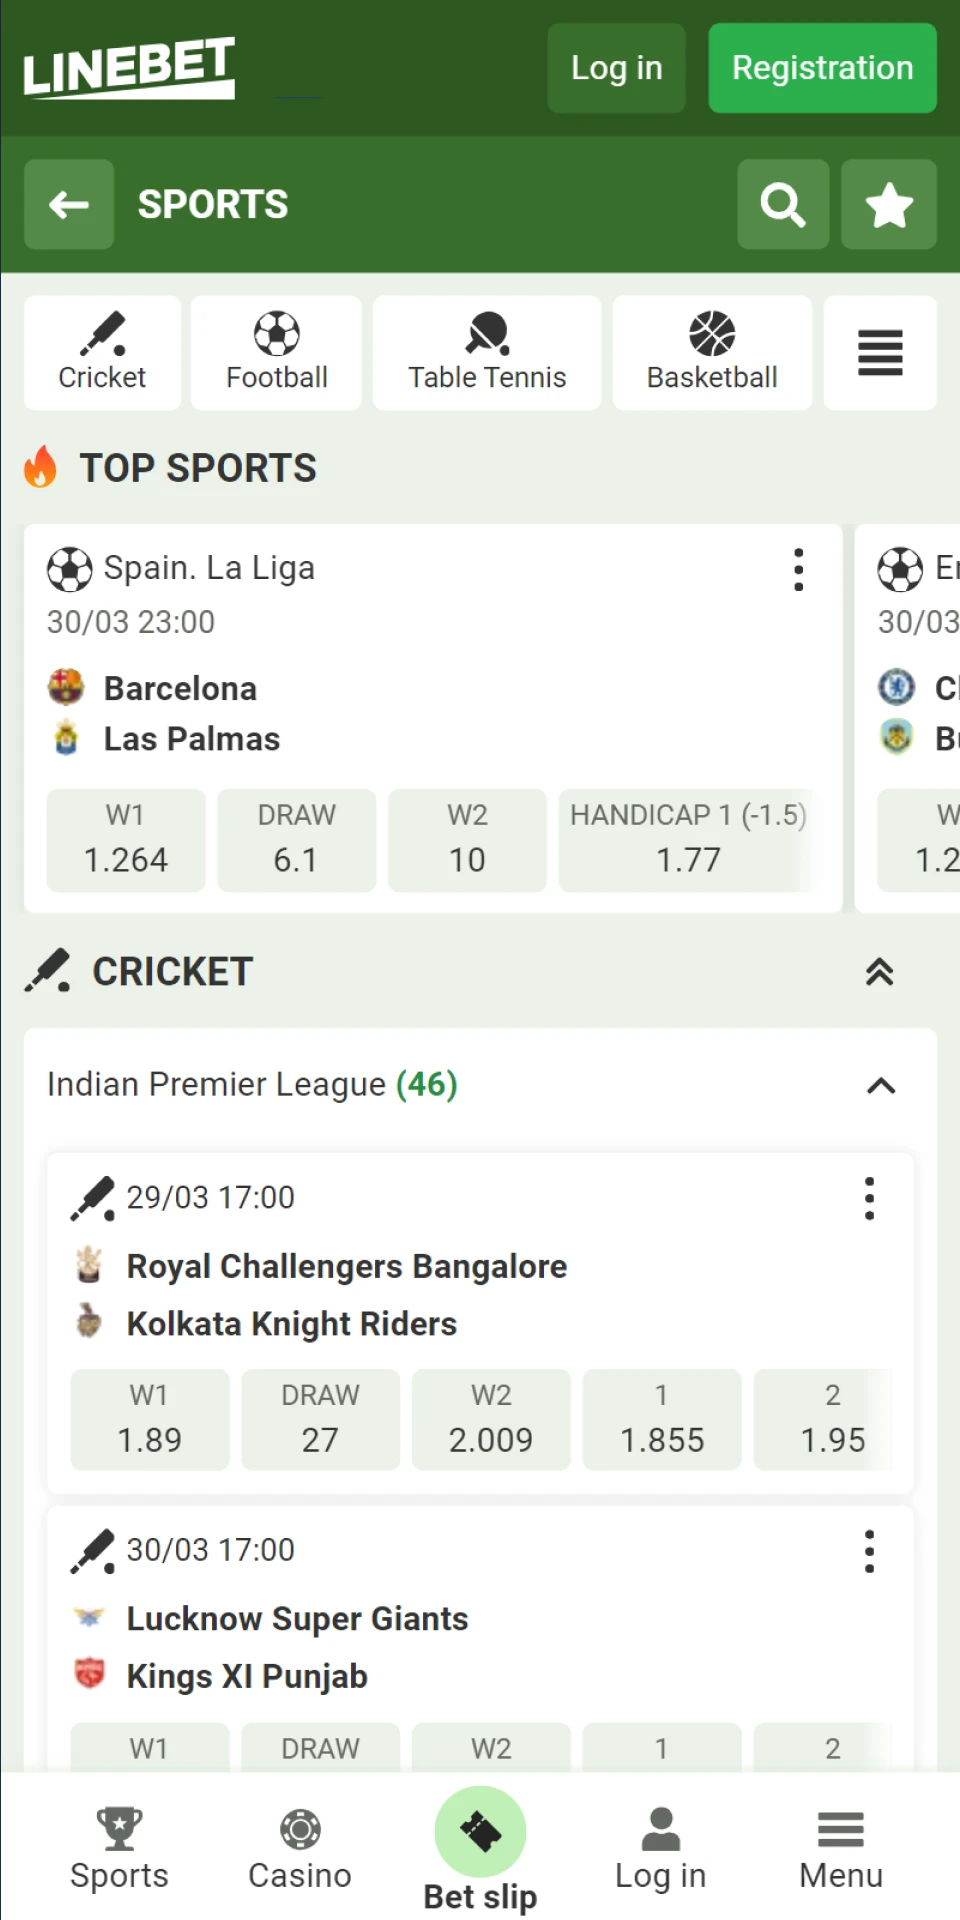 Place bets on popular sporting events in the Linebet app.